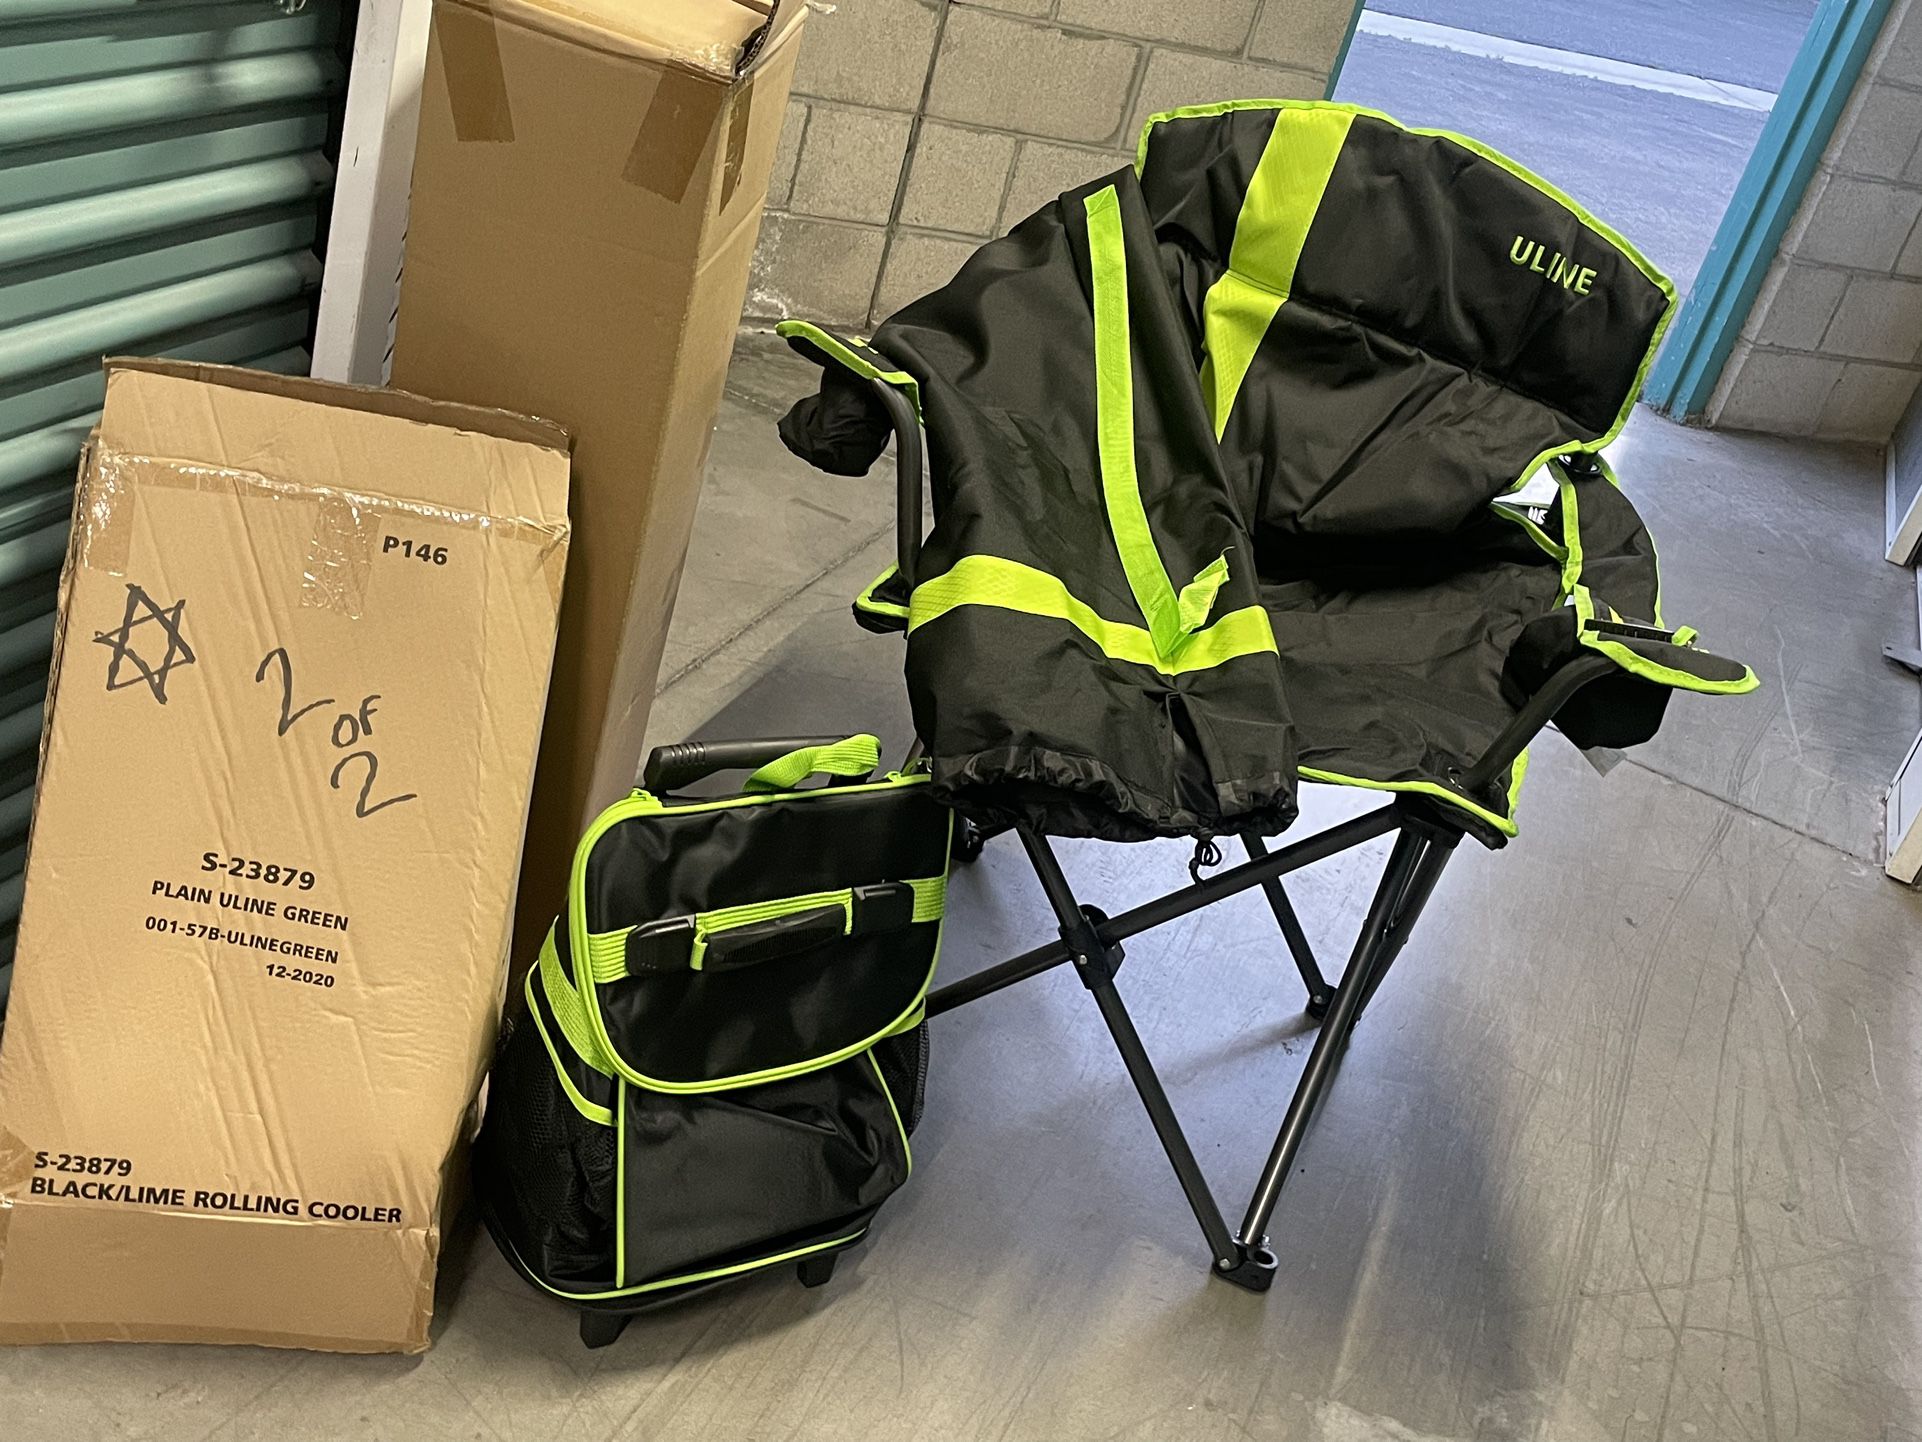 NEW - Uline Camp Chair & Rolling Cooler